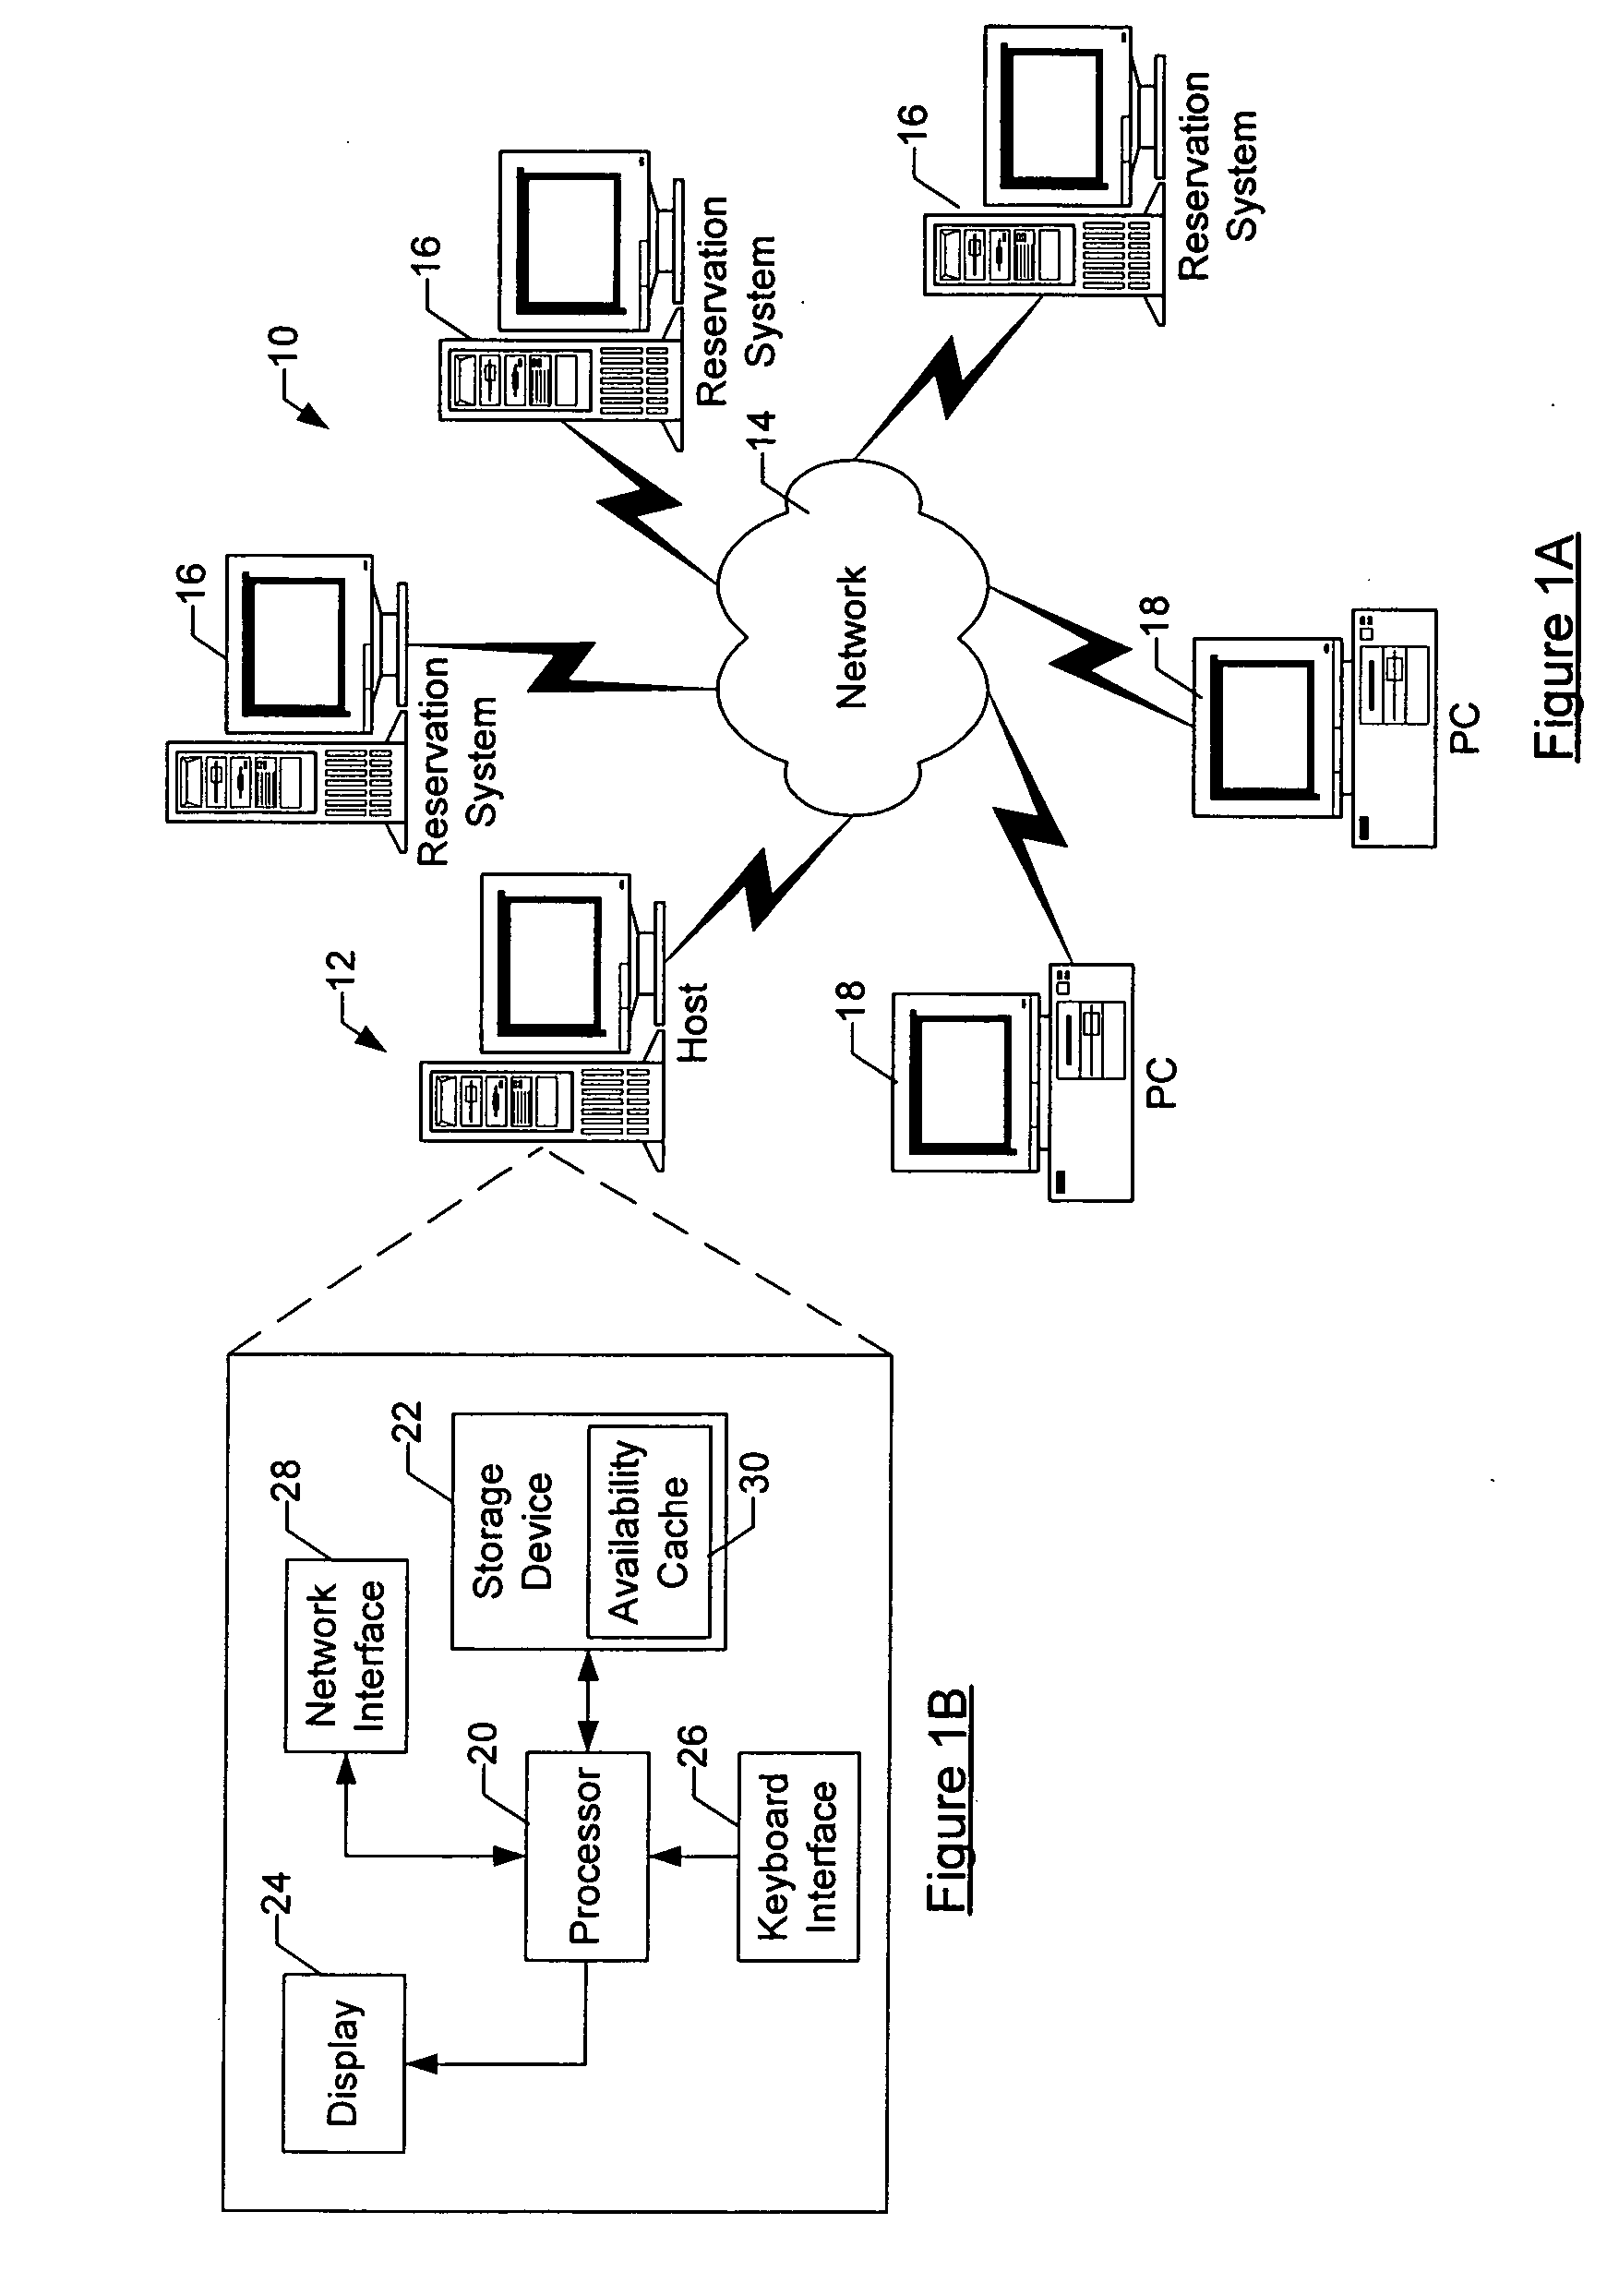 Systems, methods, and computer program products for searching and displaying low cost product availability information for a given departure-return date combination or range of departure-return date combinations